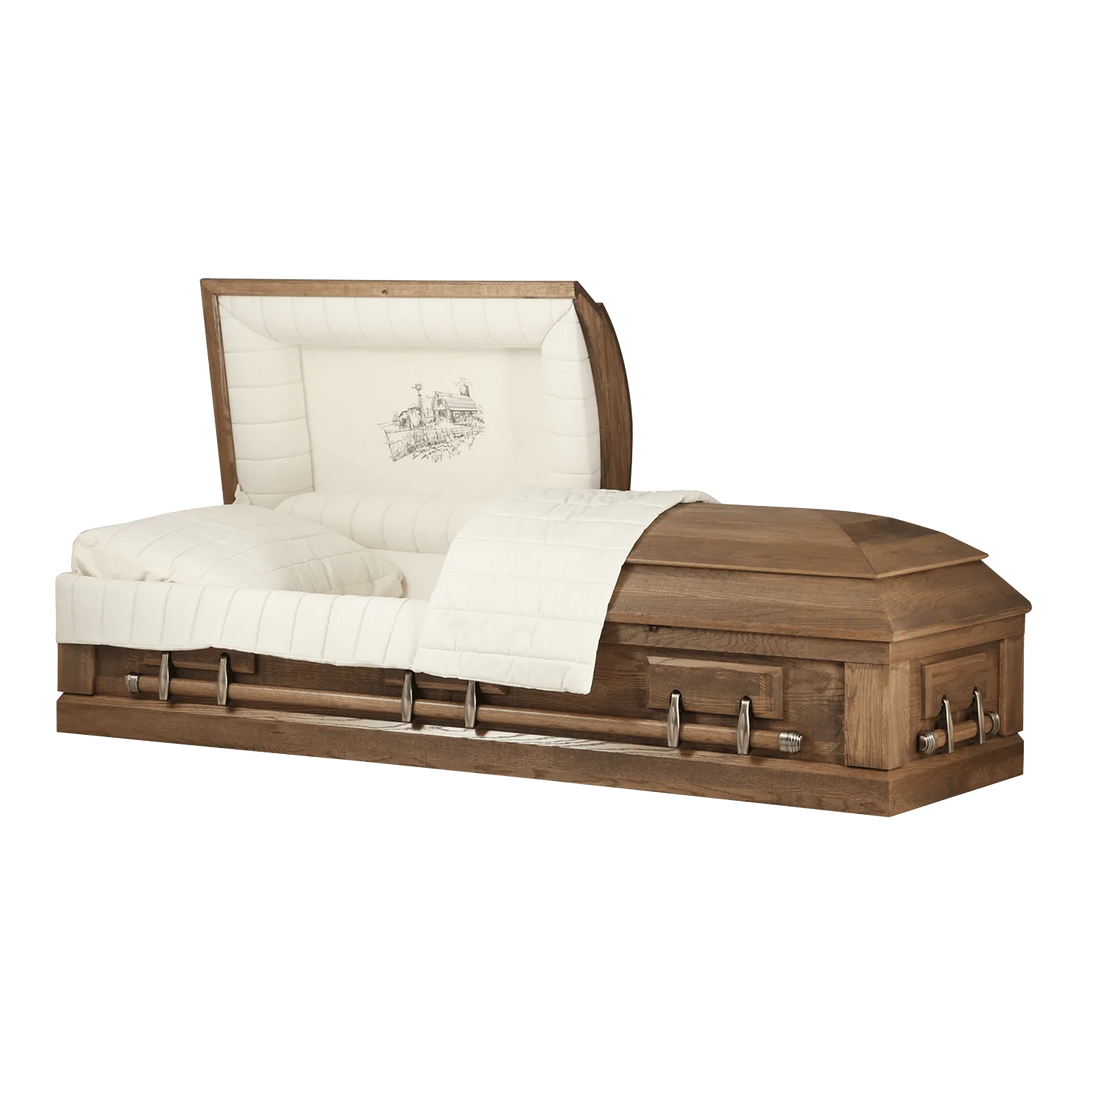 All about Oak Casket - Price, Types and Where to Buy